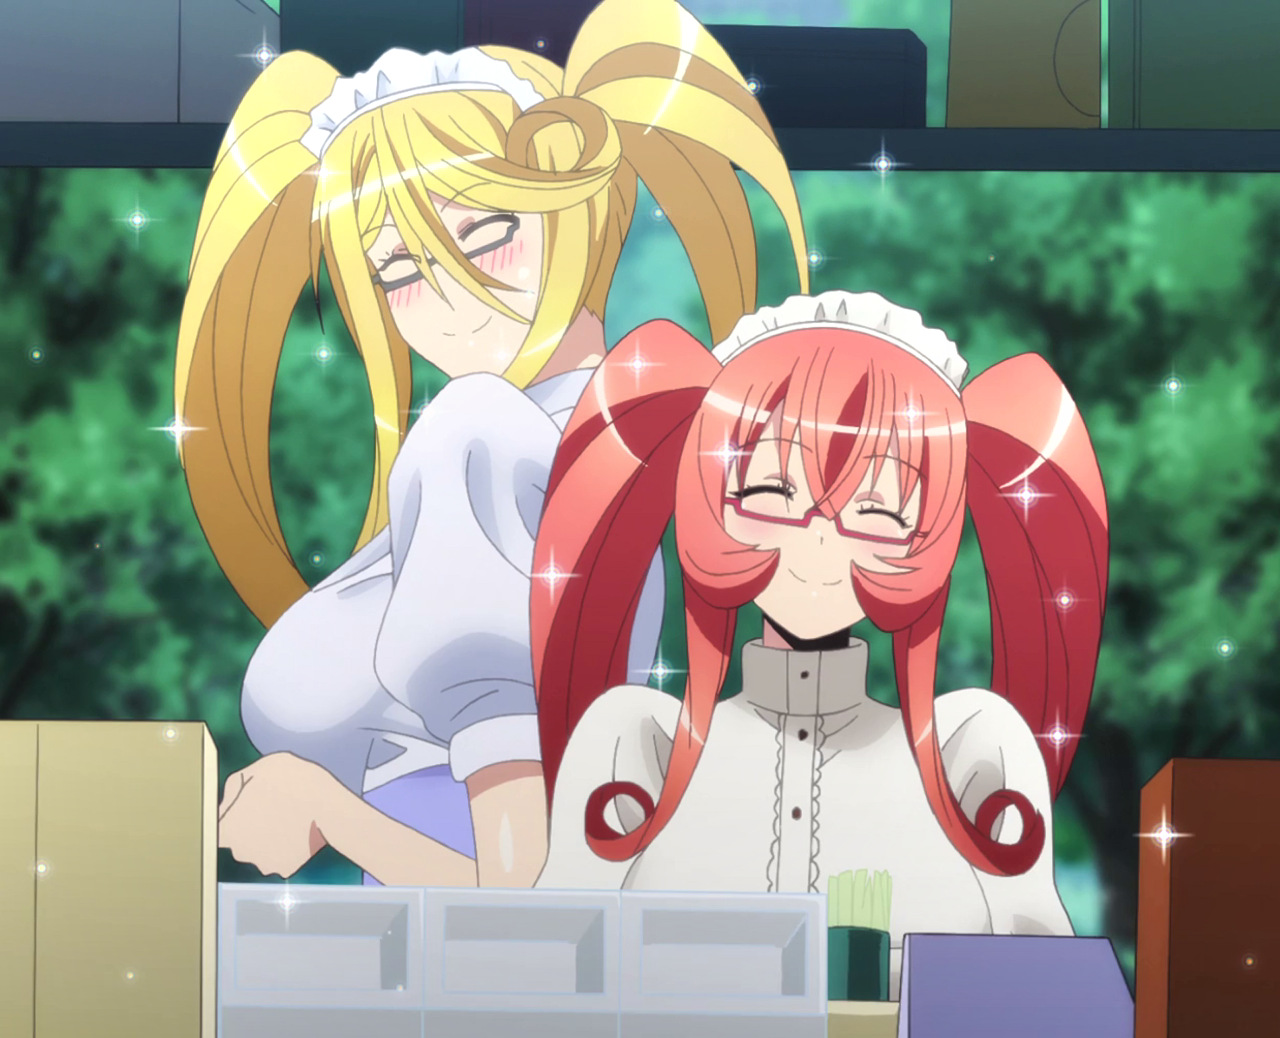 Monster musume / daily life with monster girl.